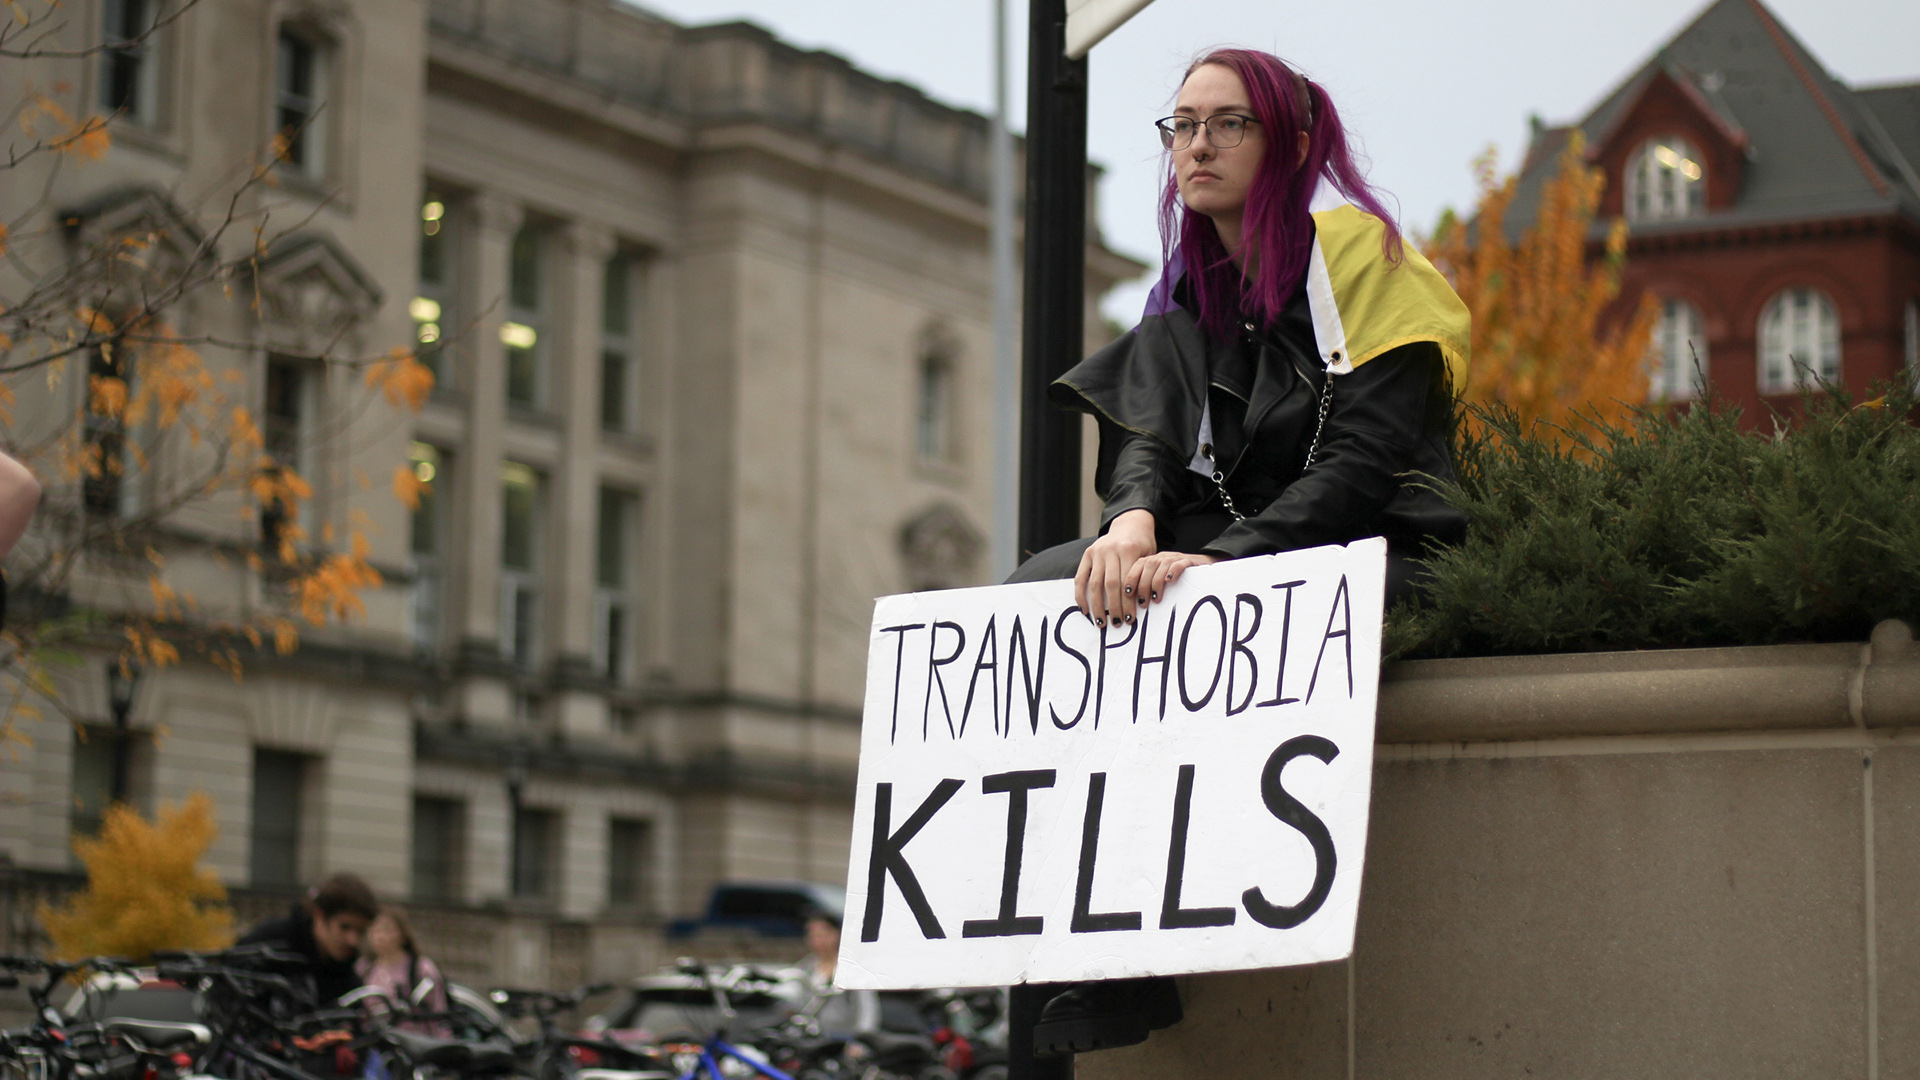 A protestor sits on the edge of a planter and holds a sign that reads "Transphobia Kills" with parked bicycles and buildings in the background.